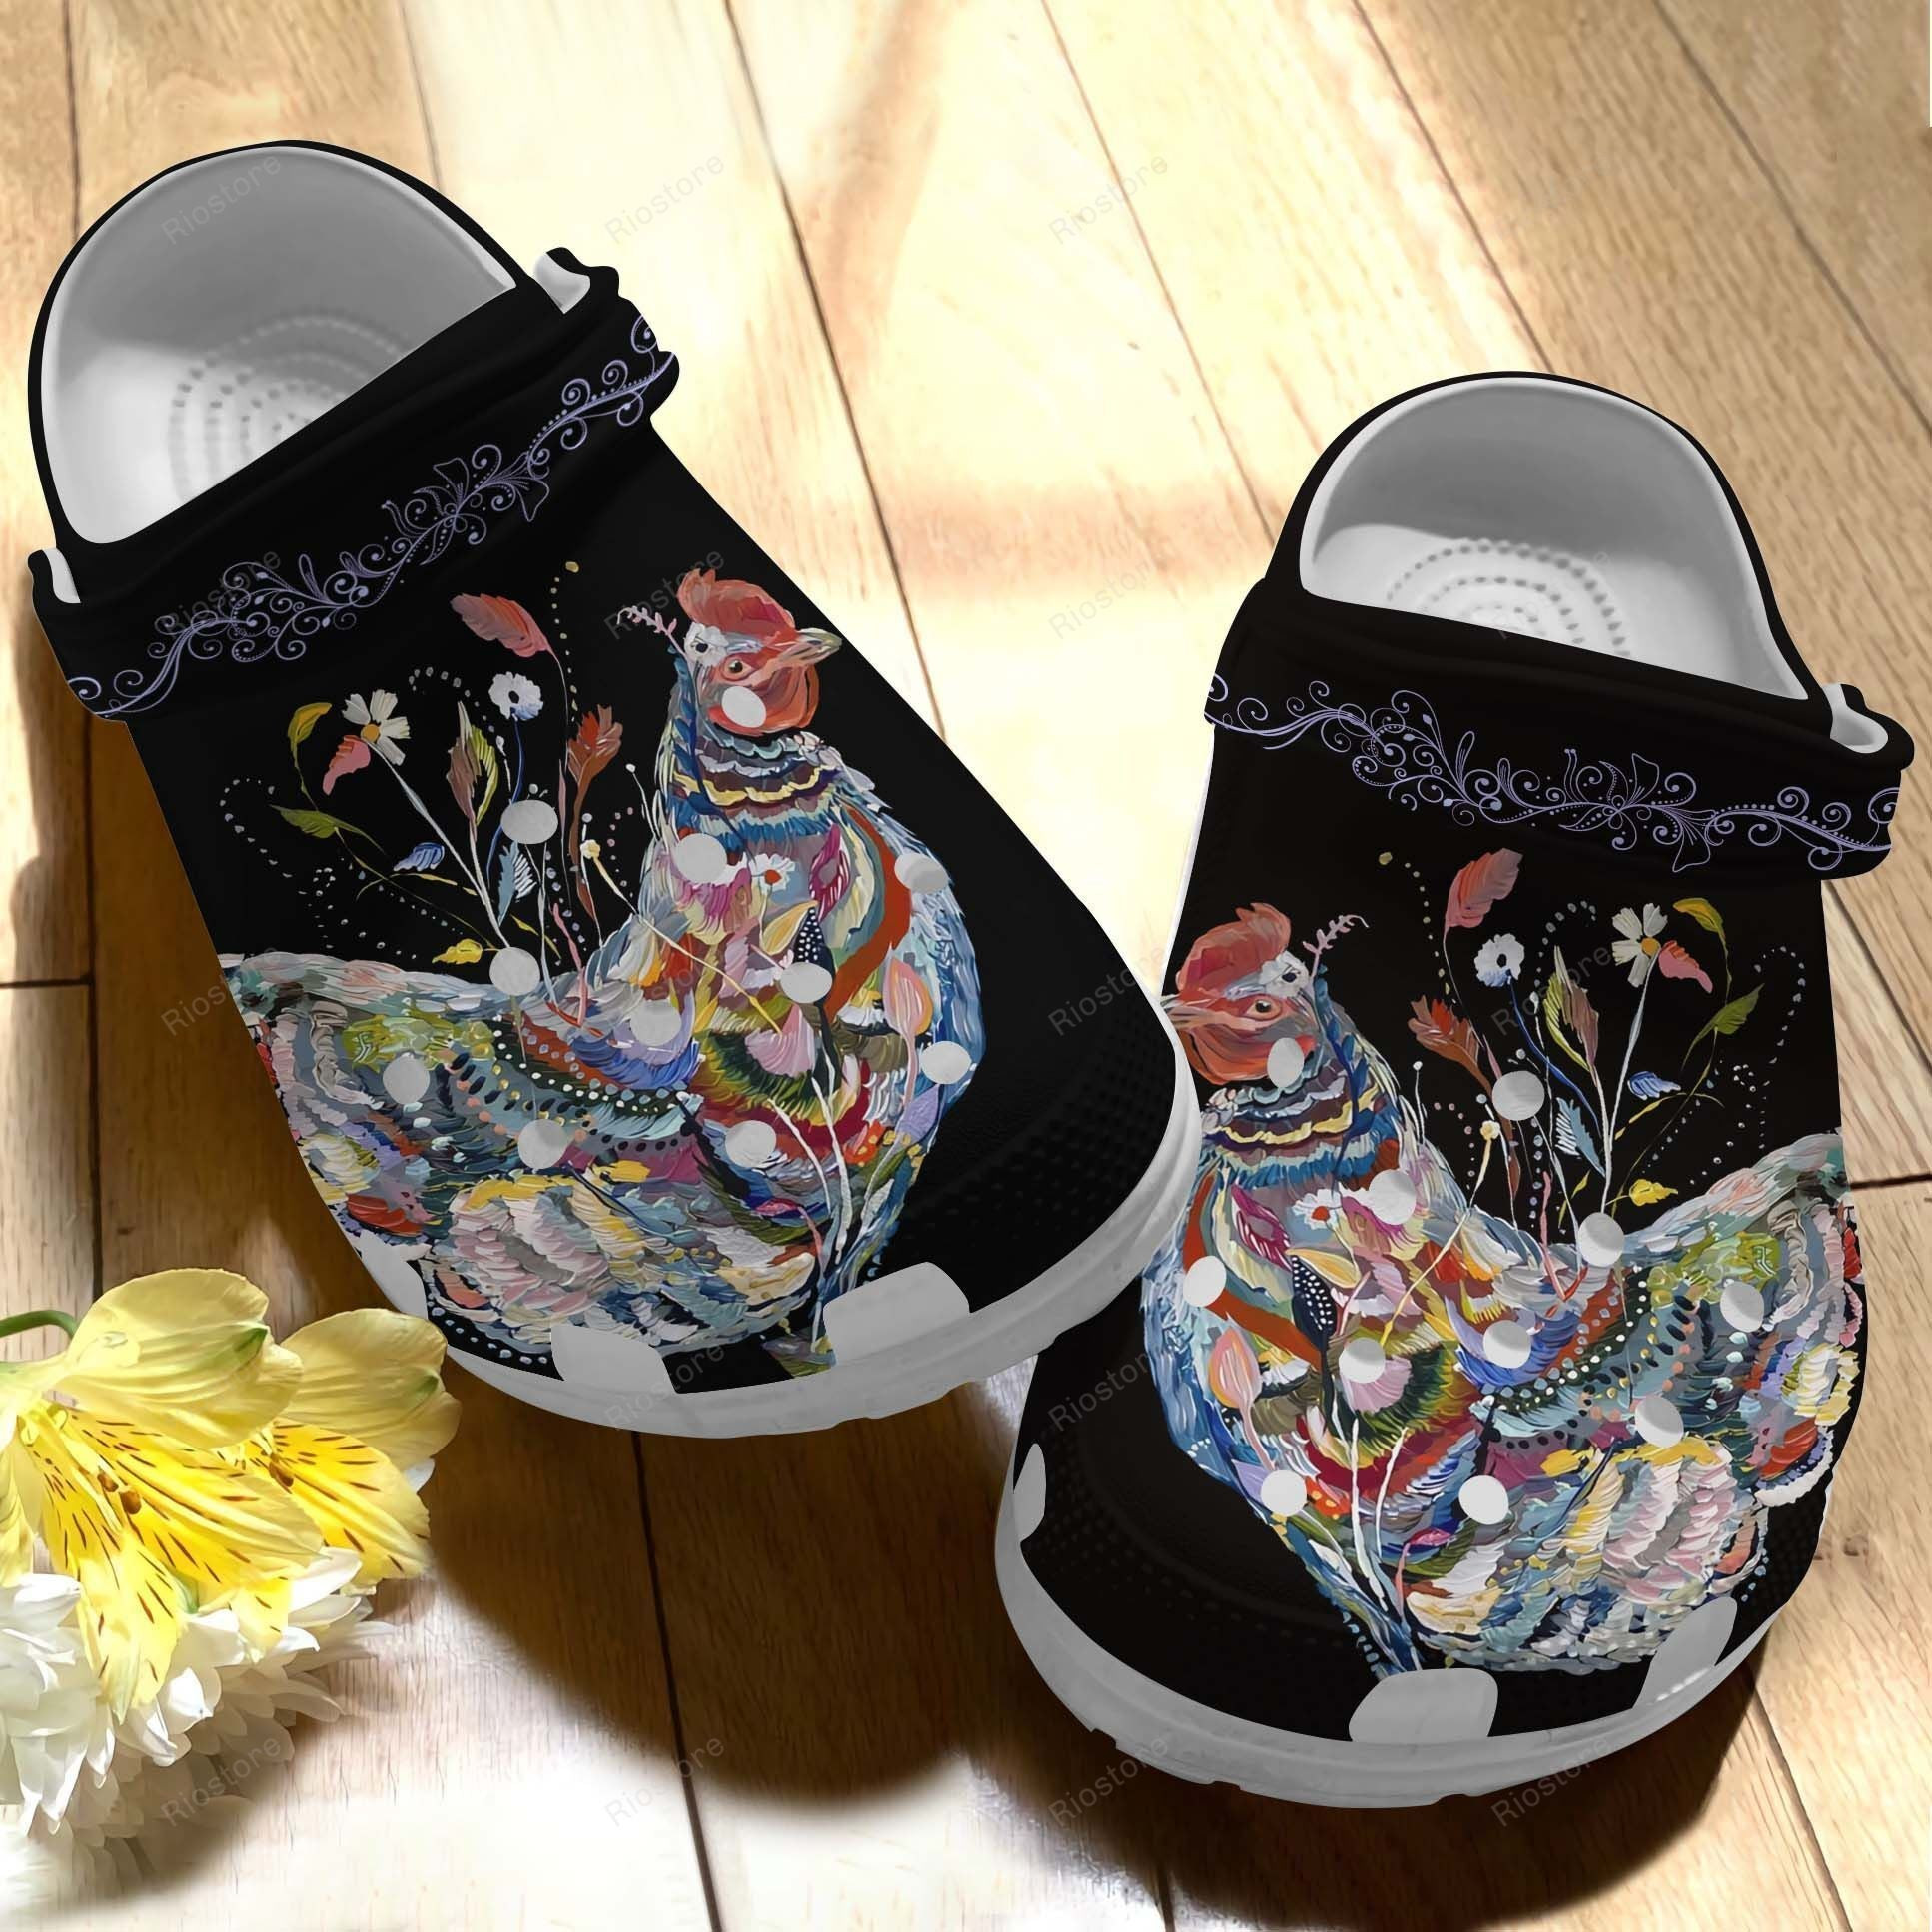 Rooster Art Croc Shoes For Father Day - Colorful Chicken Shoes Crocbland Clog Gifts For Dad Grandpa